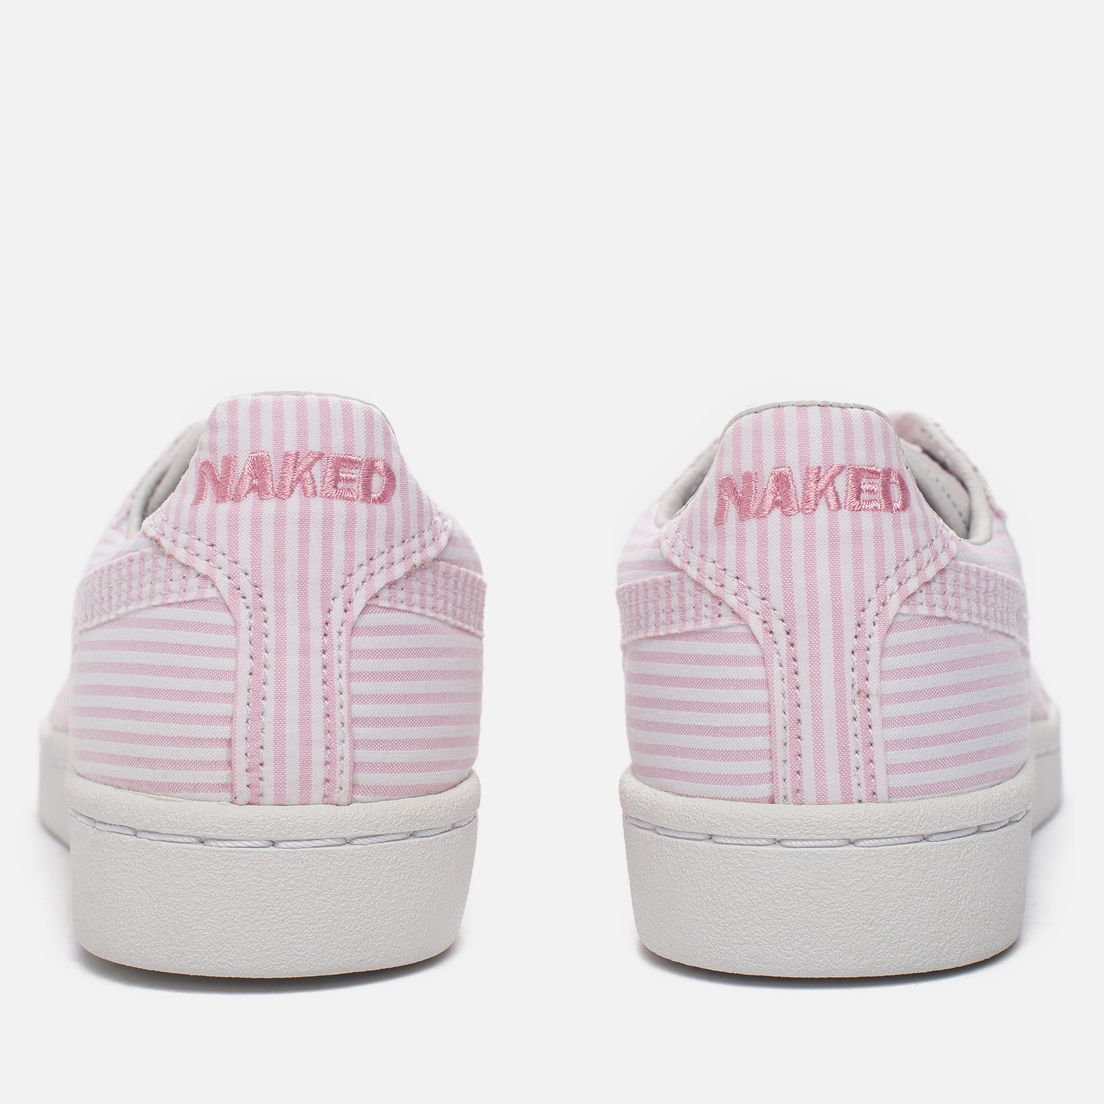 Onitsuka Tiger Женские кроссовки x Naked GSM Cotton Candy